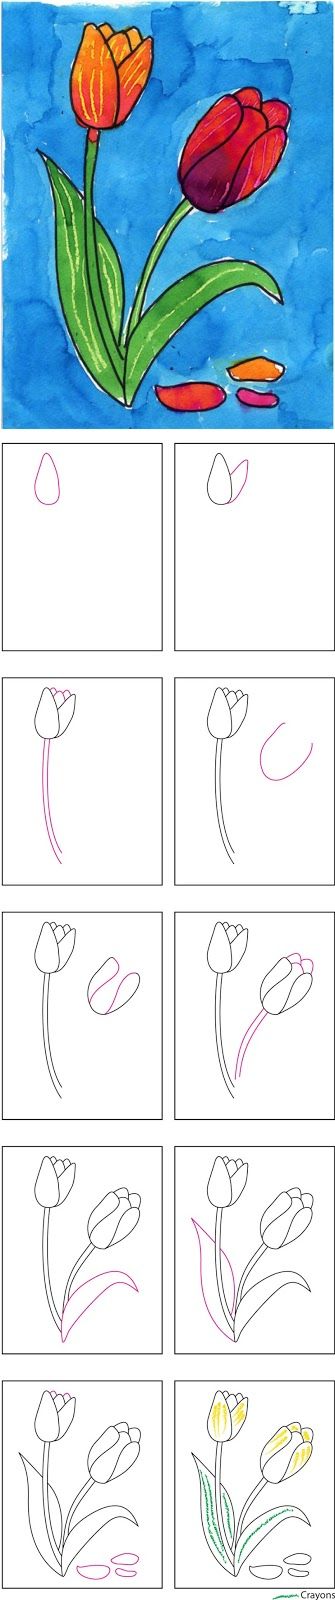 Spring Art Idea: How to Draw a Tulip-would be good for 1st or 2nd grade. Could m...